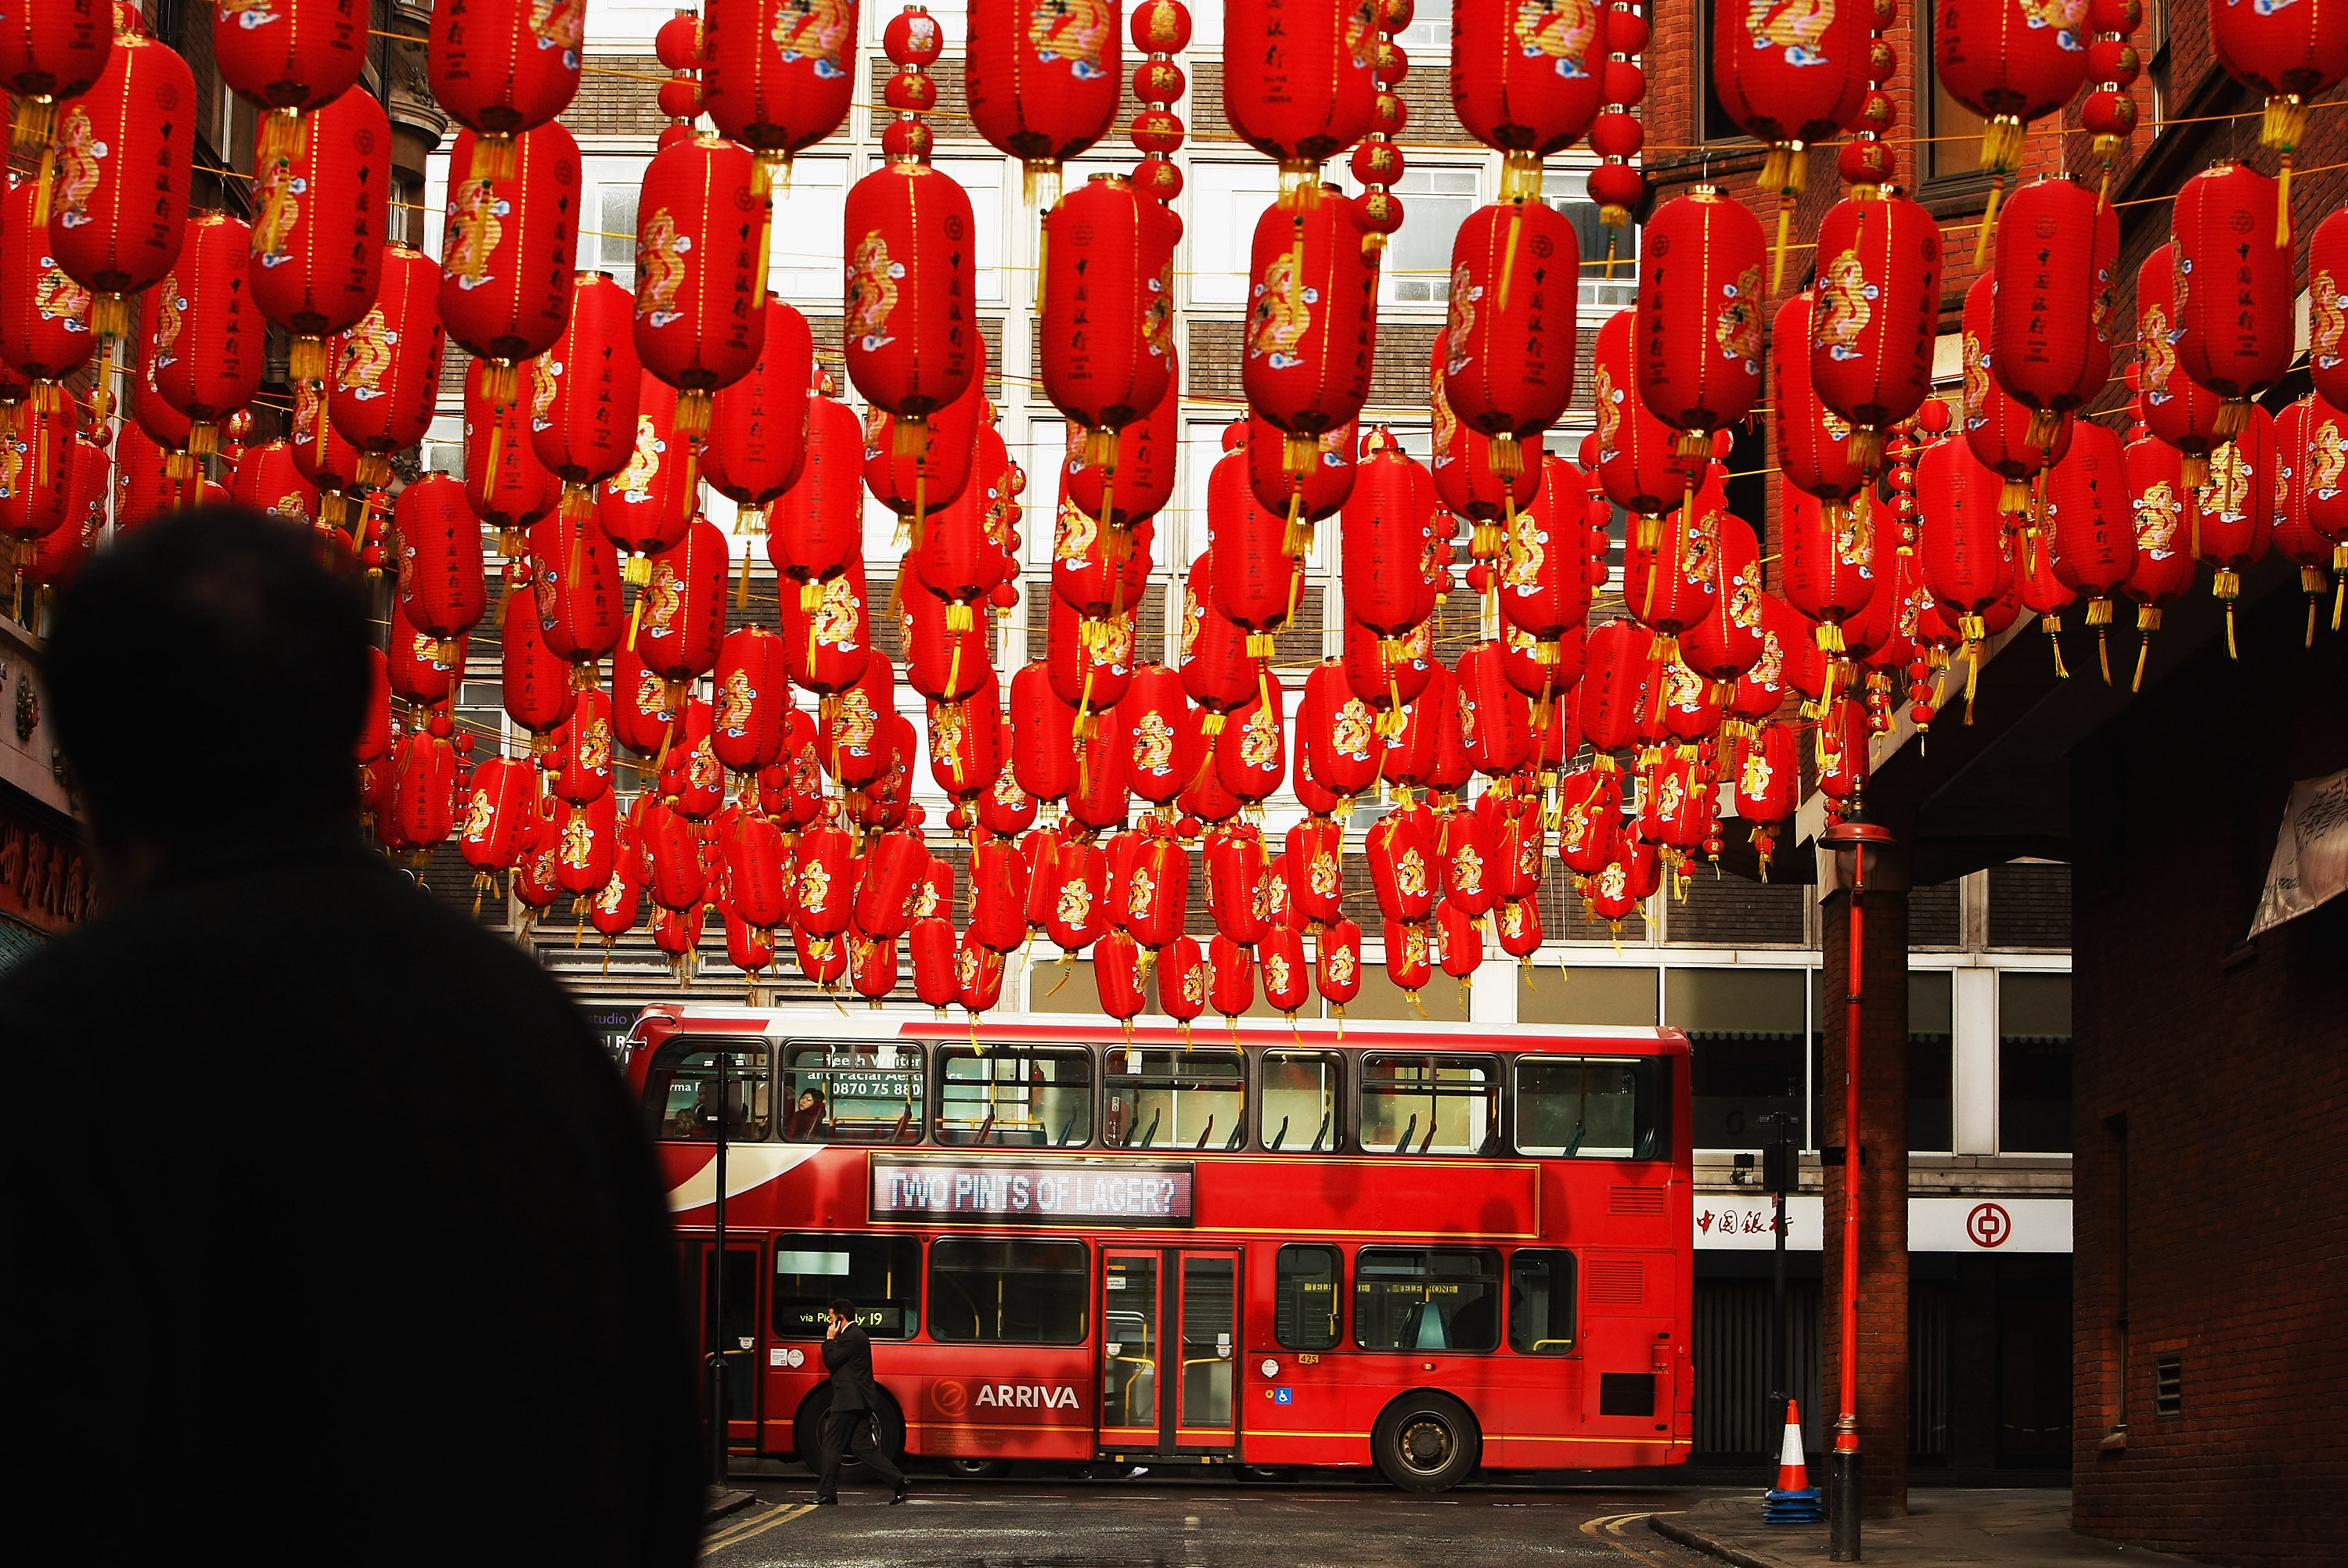 British businesses in China are reporting continued negative sentiment, despite recent attempts to improve the business environment for overseas firms. Photo: Getty Images